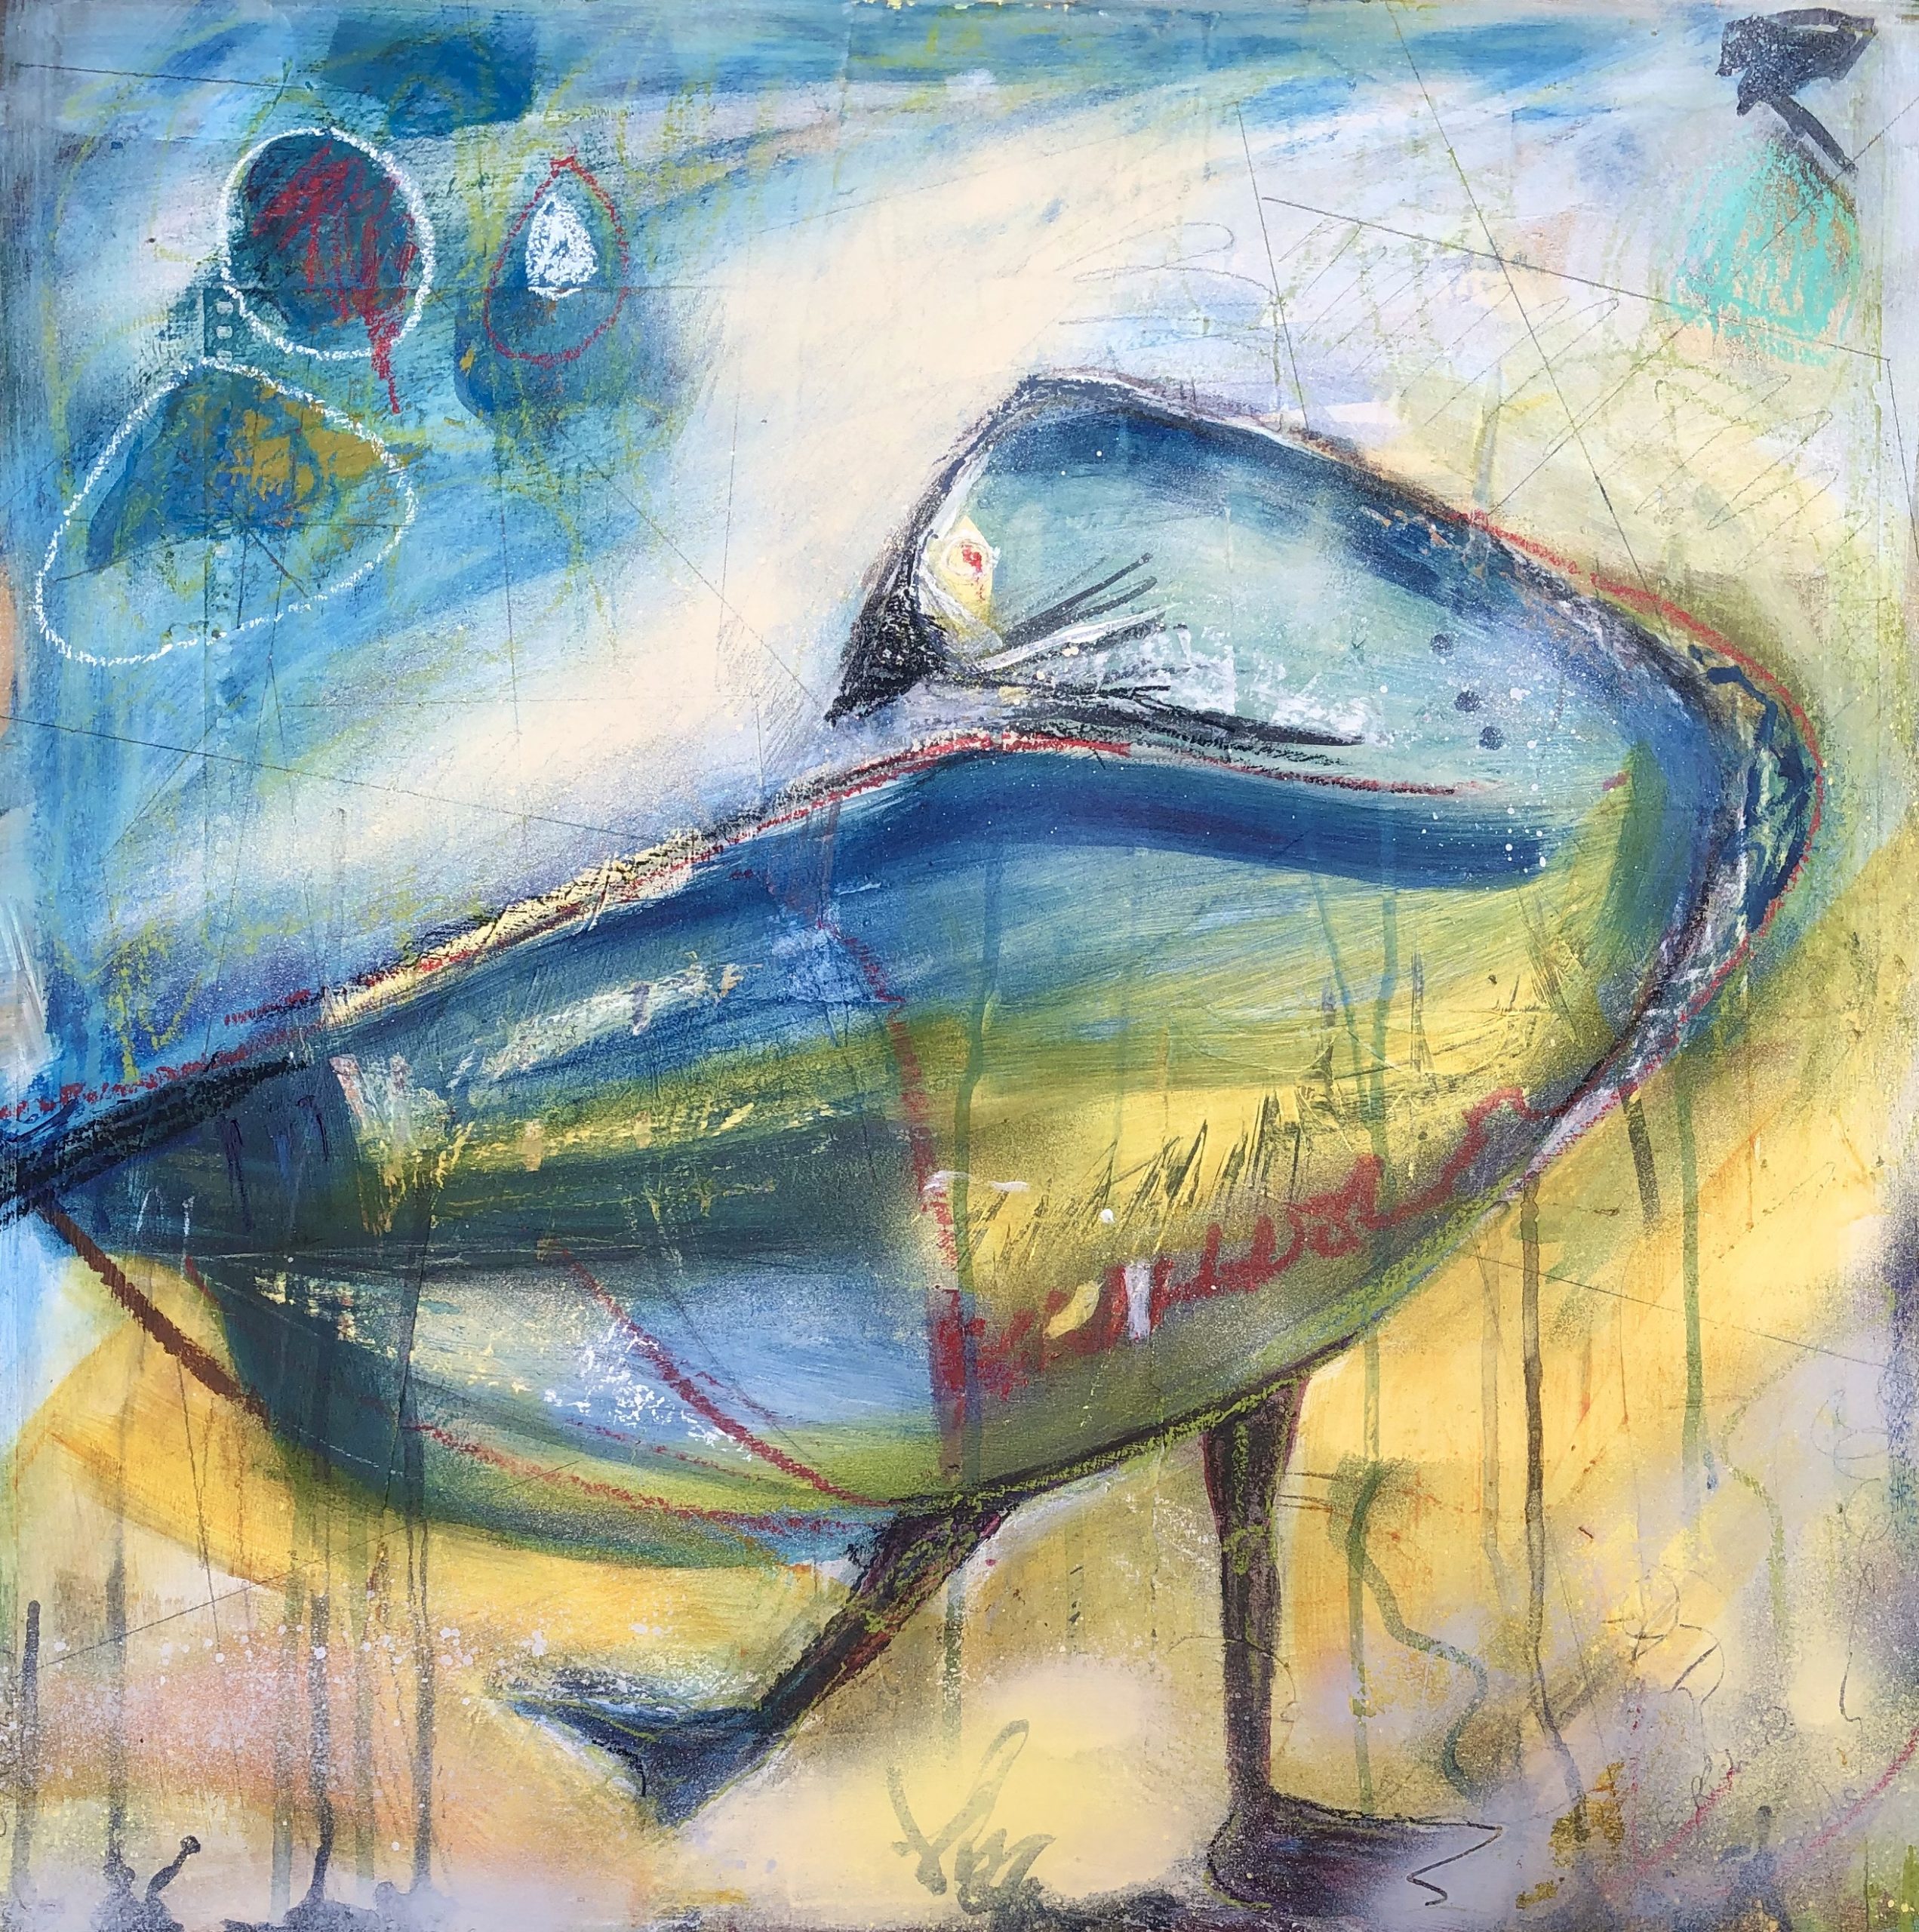 Painting The Goose who liked to Dance - mixed media on board - 50 x 50 cm - Chrissie Richards